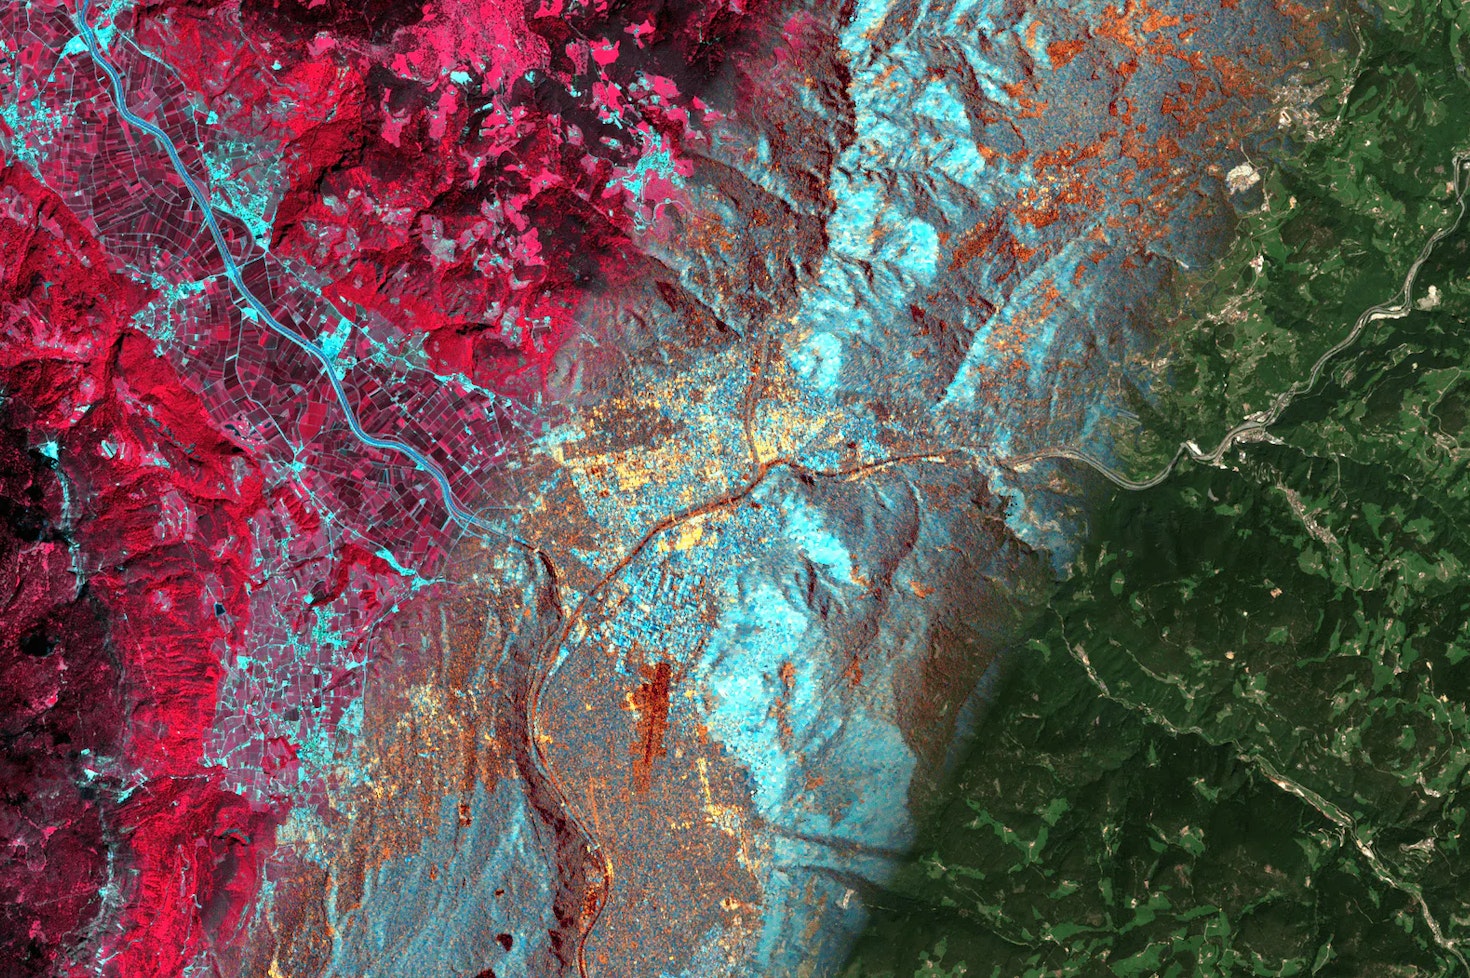 This image is view from the atmosphere of the city of Bolzano (Italy), created with a composition of data from two Copernicus satellite missions. The left part is a so-called "false color composite", using Sentinel-2 band 8 (near infrared), band 4 (red) and band 3 (green) for the EGB image channels. It is most commonly used to assess plant density and health. The central part is a color composition based on Sentinel-1 radar back-scatter of the two available polarizations, VV and VH. The right part is the classical RGB composite, using Sentinel-2 band 4 (red), band 3 (green) and band 2 (blue) for the RGB image channels. It resembles what our vision sees naturally and what we would see in a standard photo.